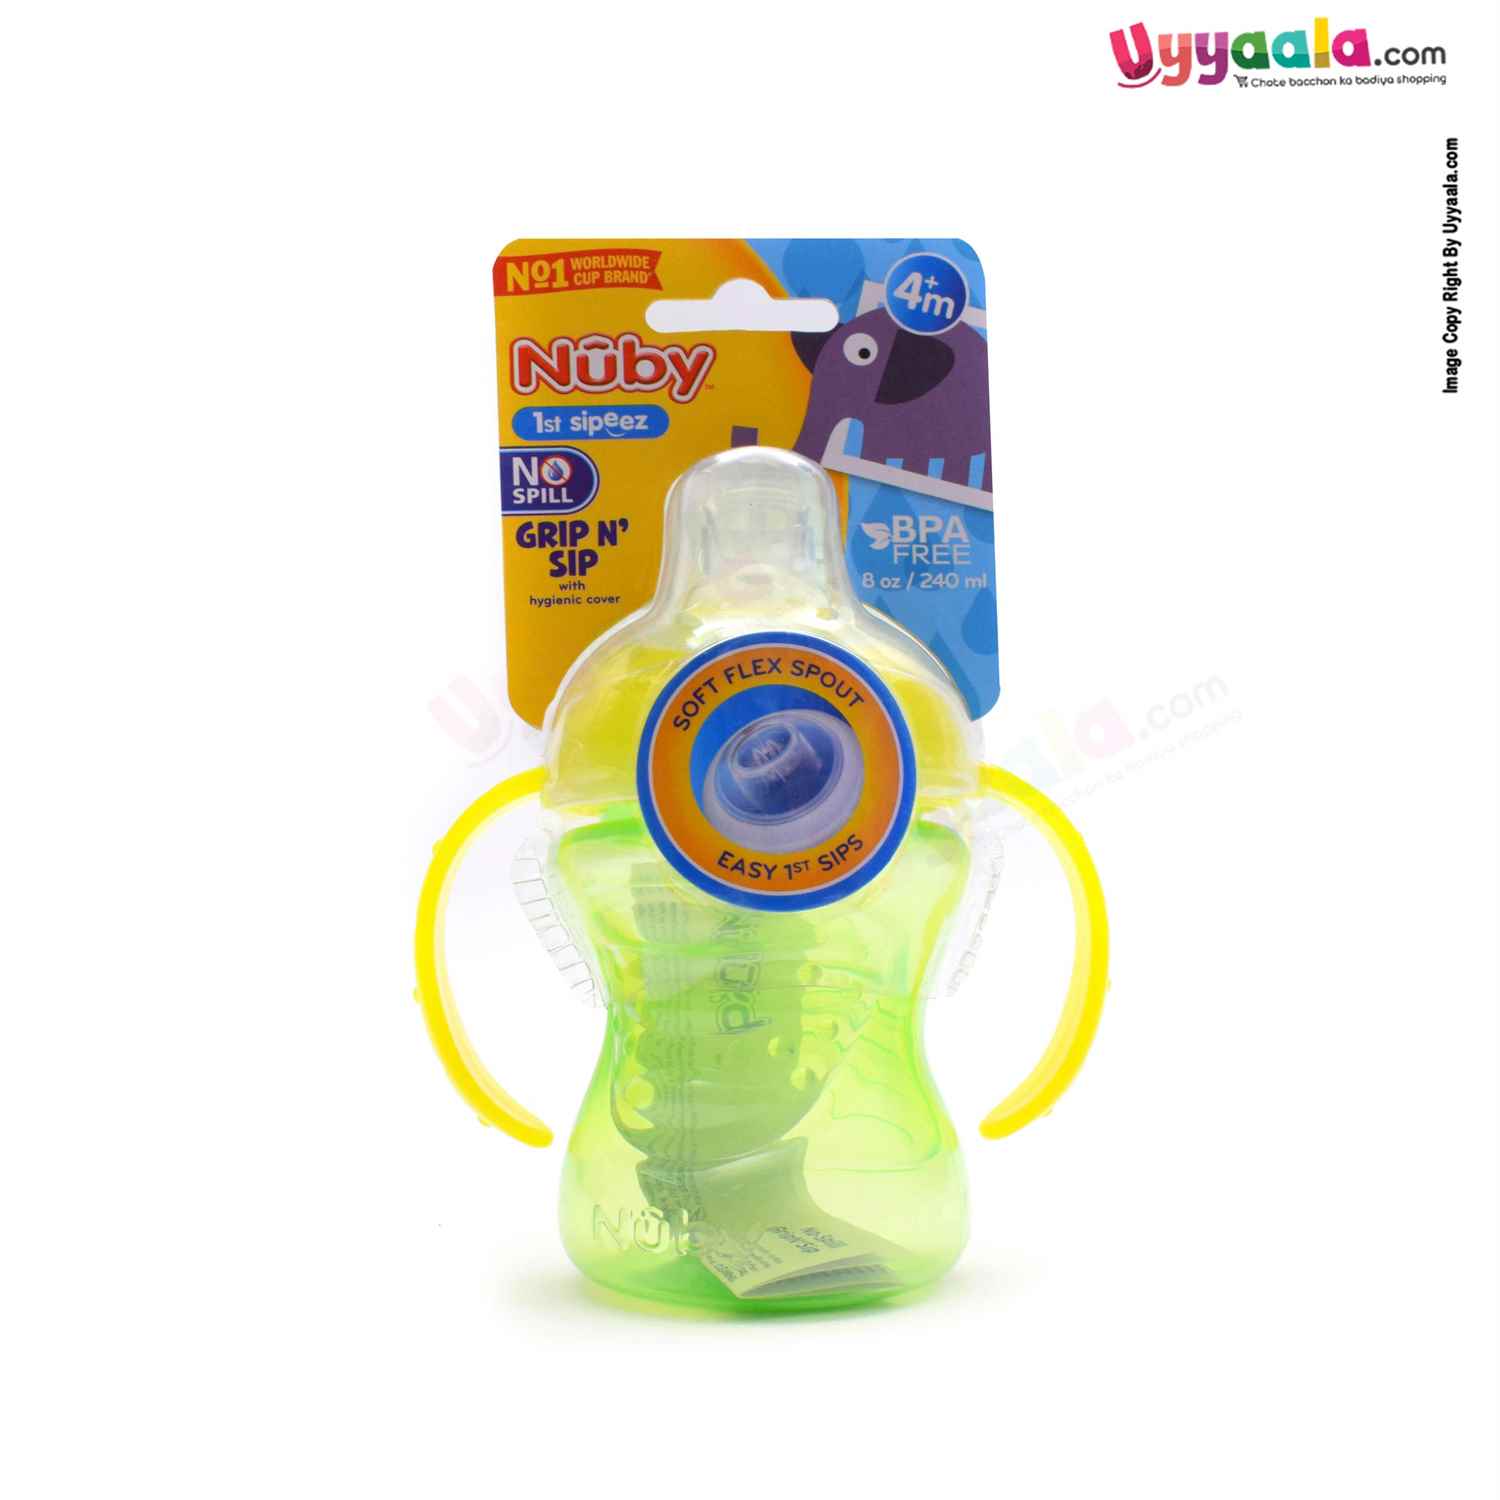 NUBY 'Grip n sip' sipper with soft flexible spout - 300ml, 4+m age